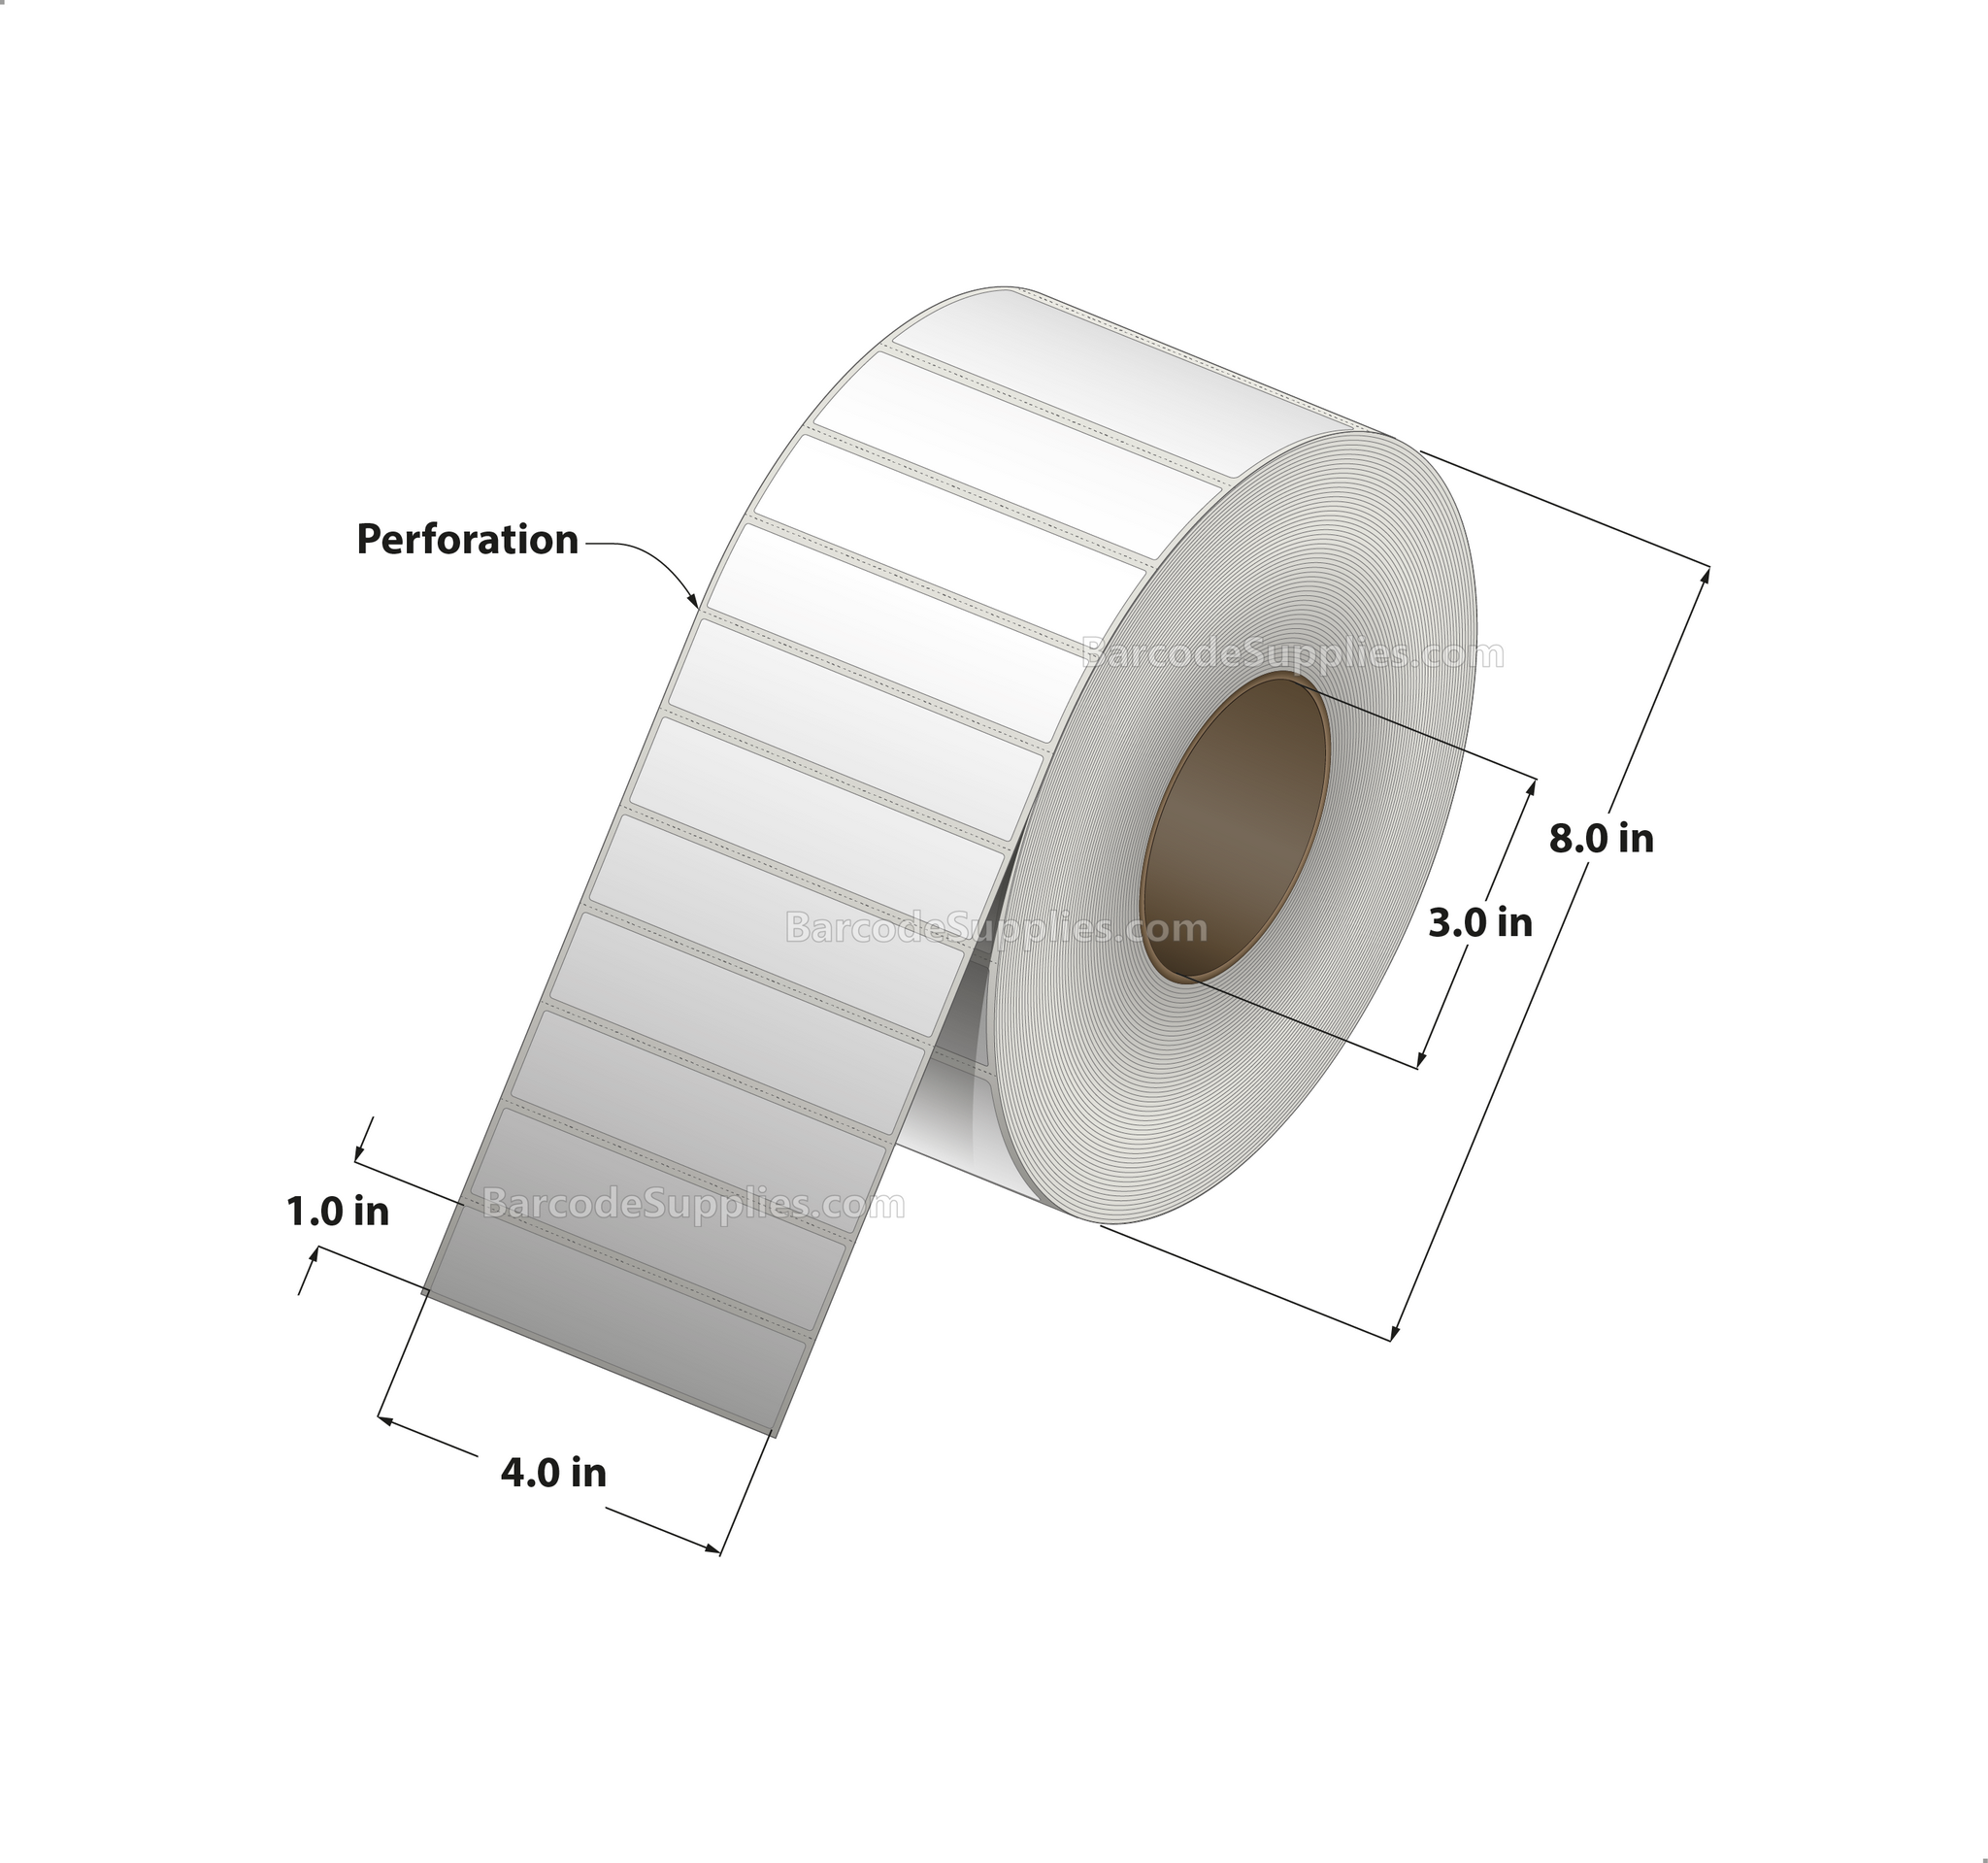 4 x 1 Thermal Transfer White Labels With Rubber Adhesive - Perforated - 5560 Labels Per Roll - Carton Of 4 Rolls - 22240 Labels Total - MPN: CTT400100-3P